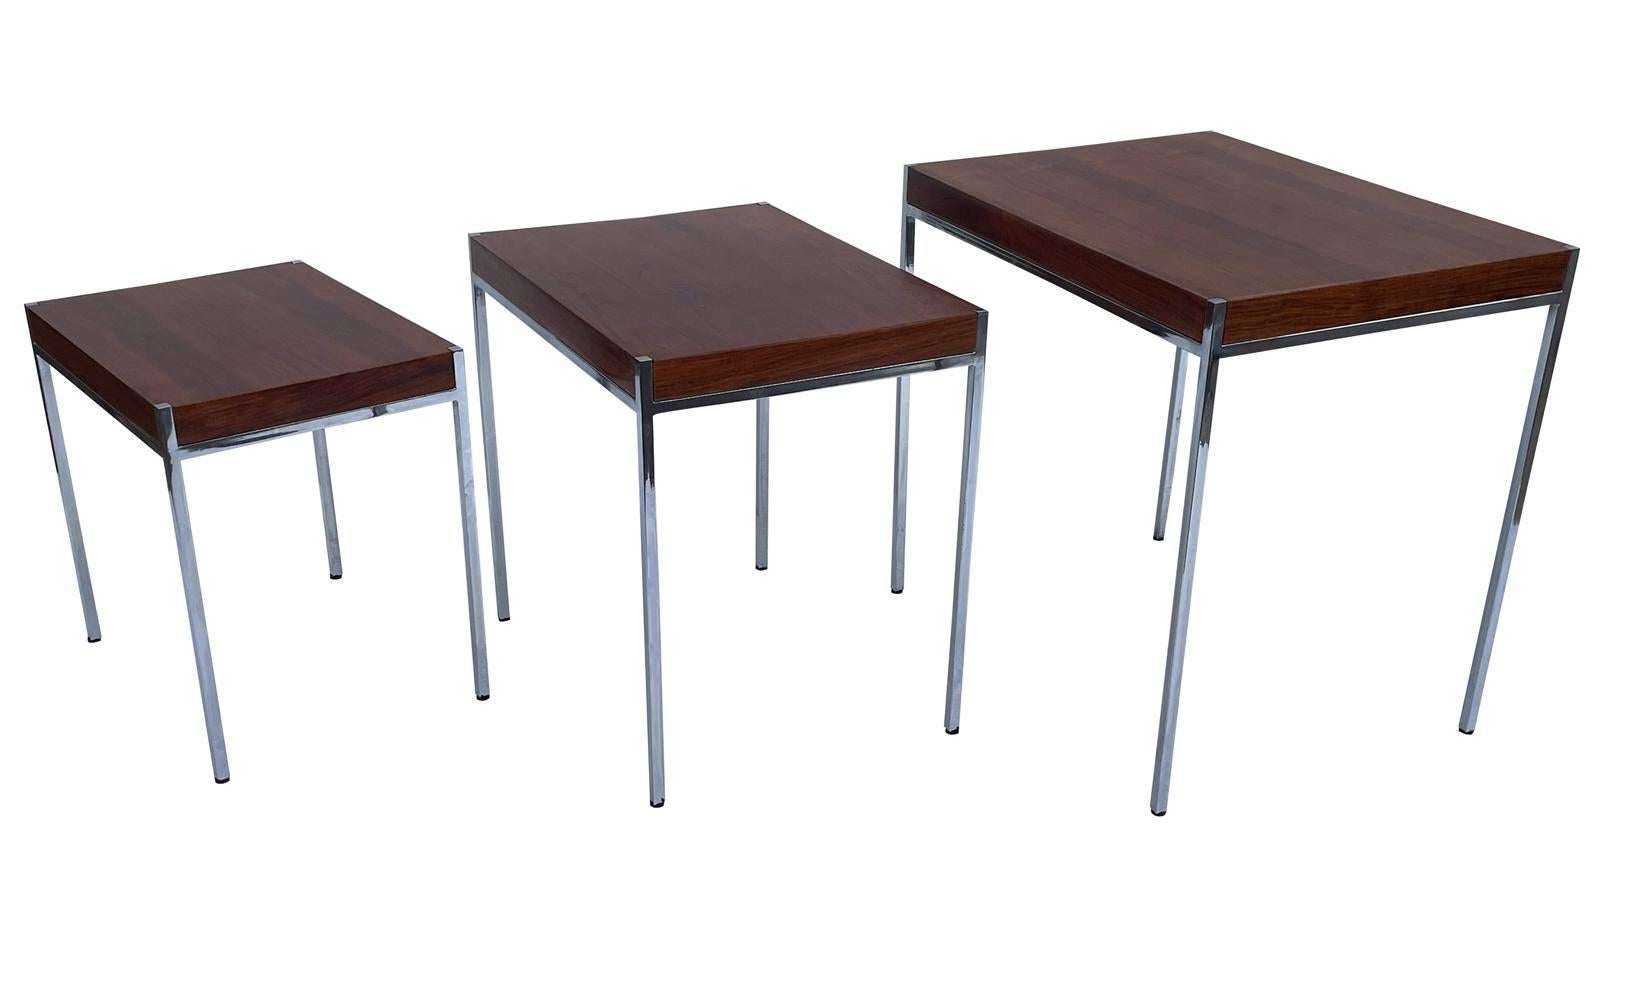 Scandinavian Modern Midcentury Danish Modern Rosewood and Chrome Nesting Tables or Side Tables For Sale